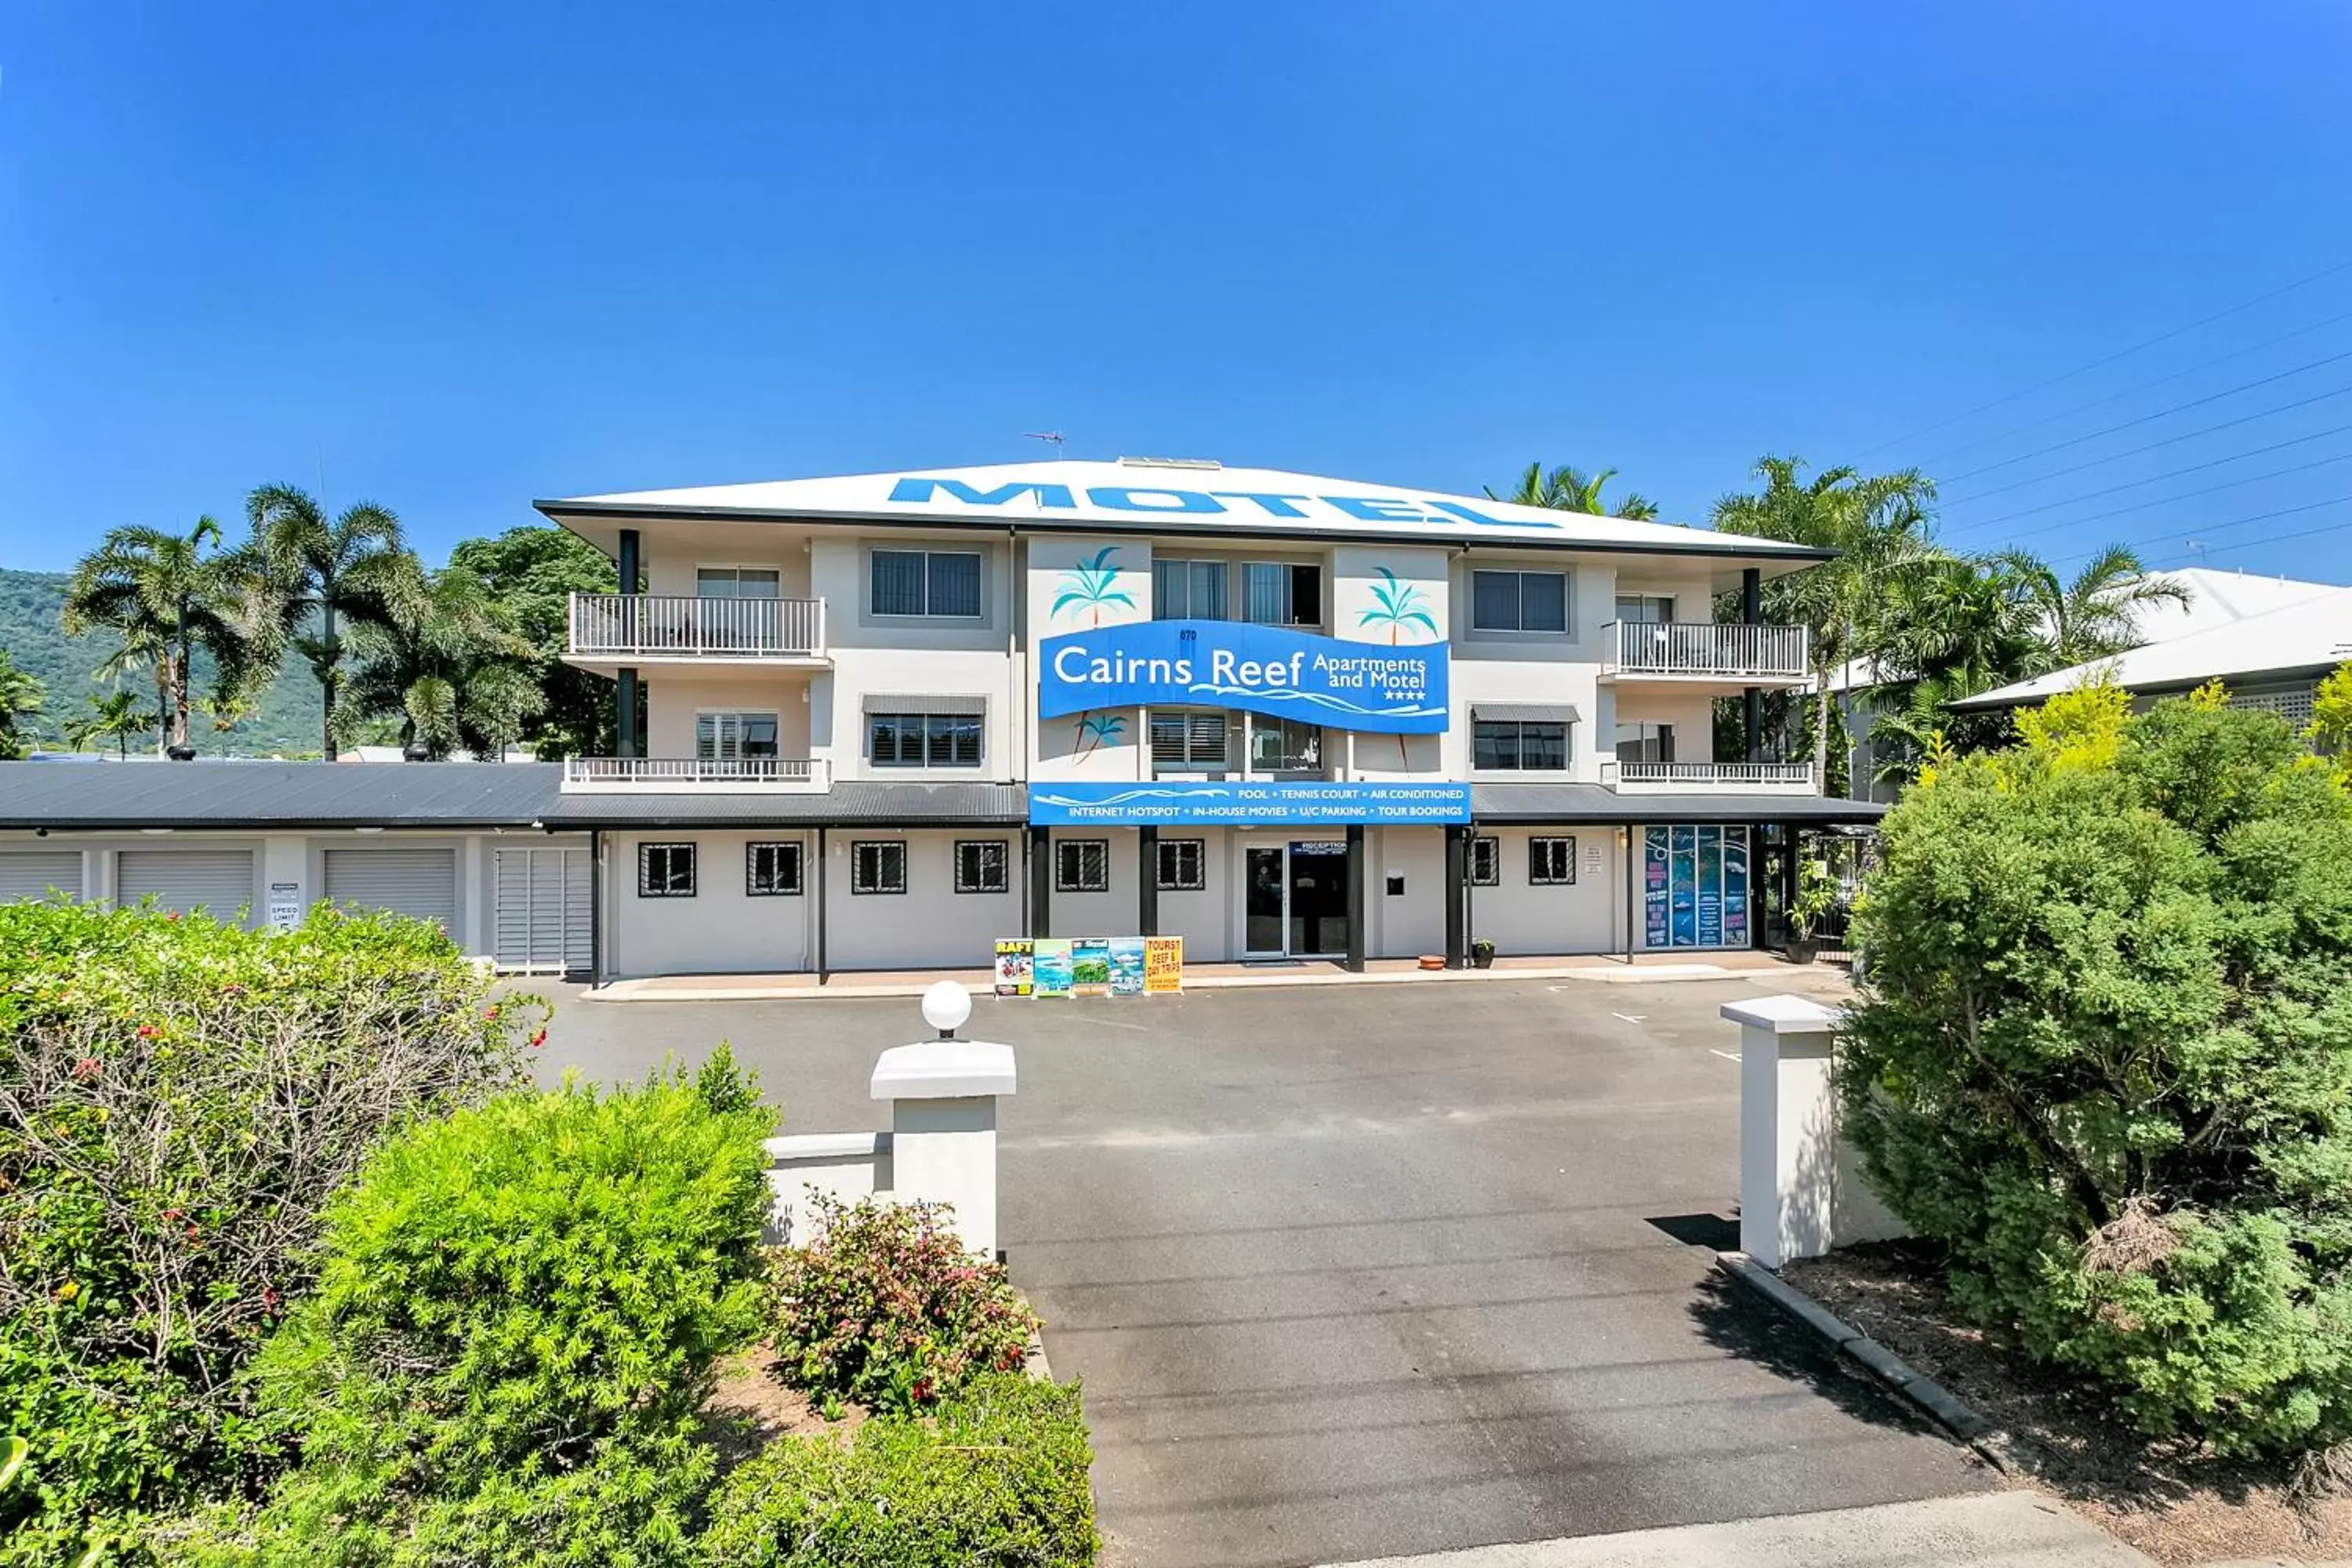 Facade/entrance, Property Building in Cairns Reef Apartments & Motel